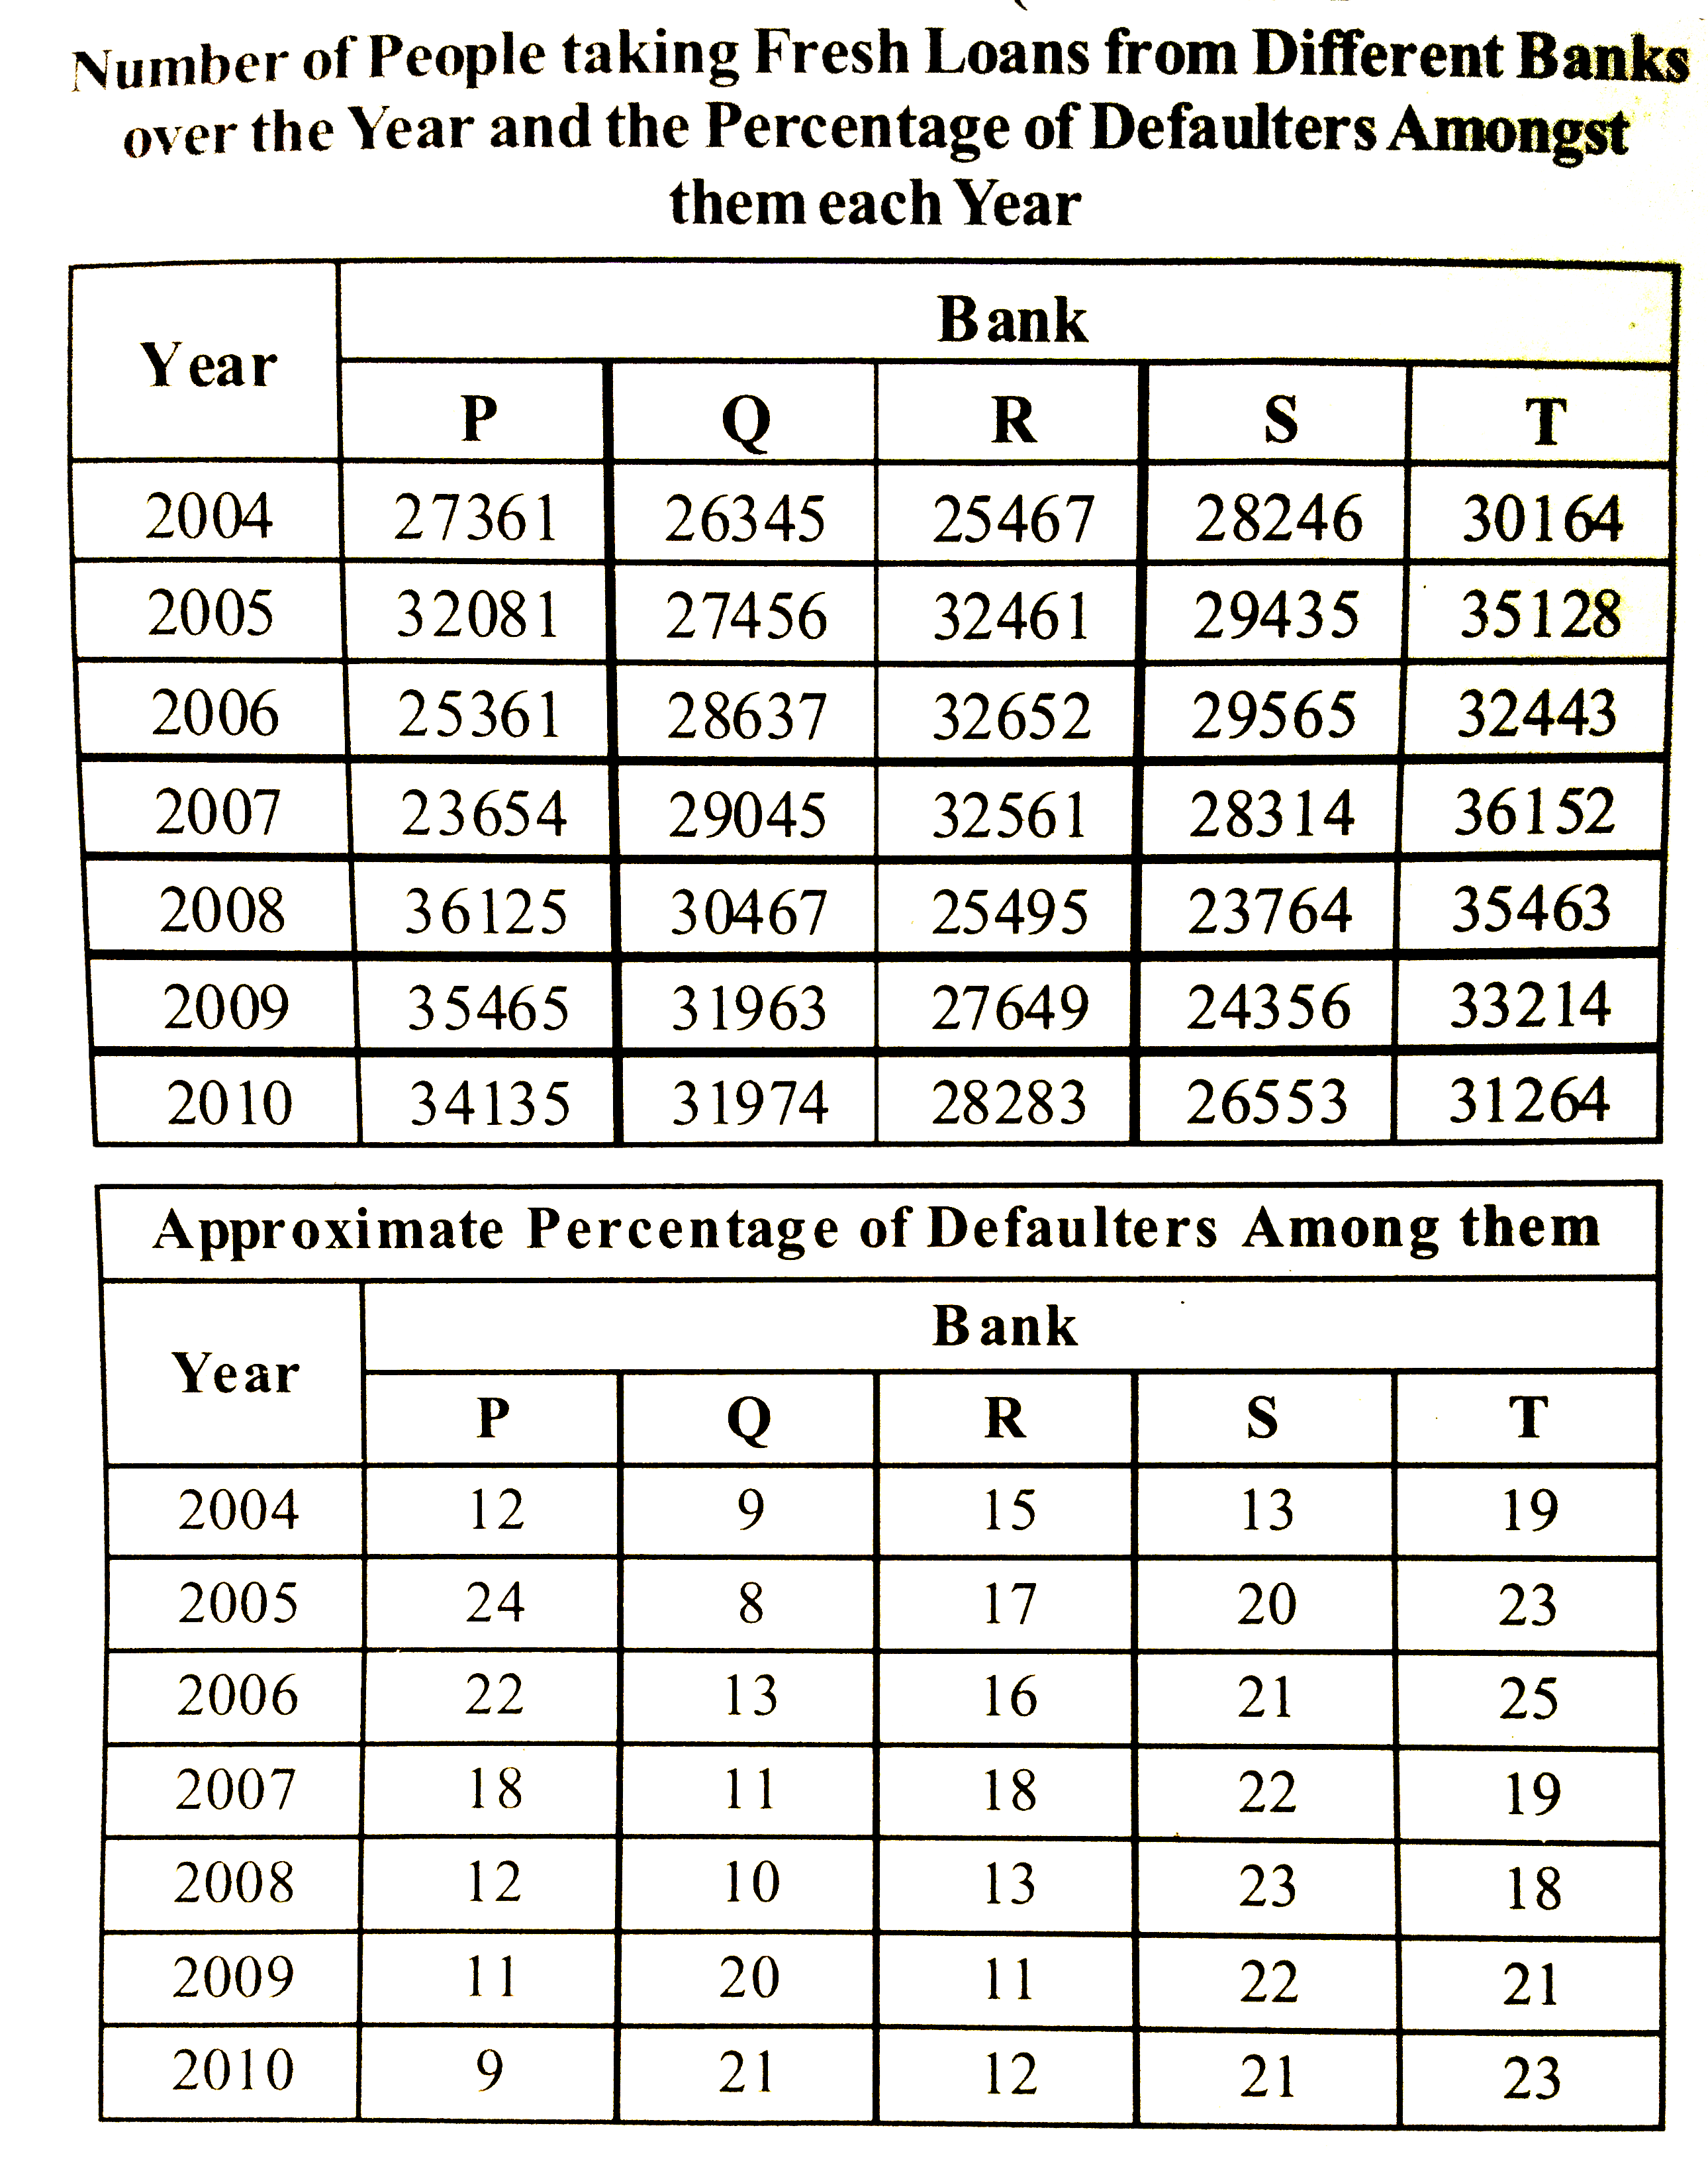 In which of the following years was the difference in number of people taking loan from Bank P from the previous years the highest ?